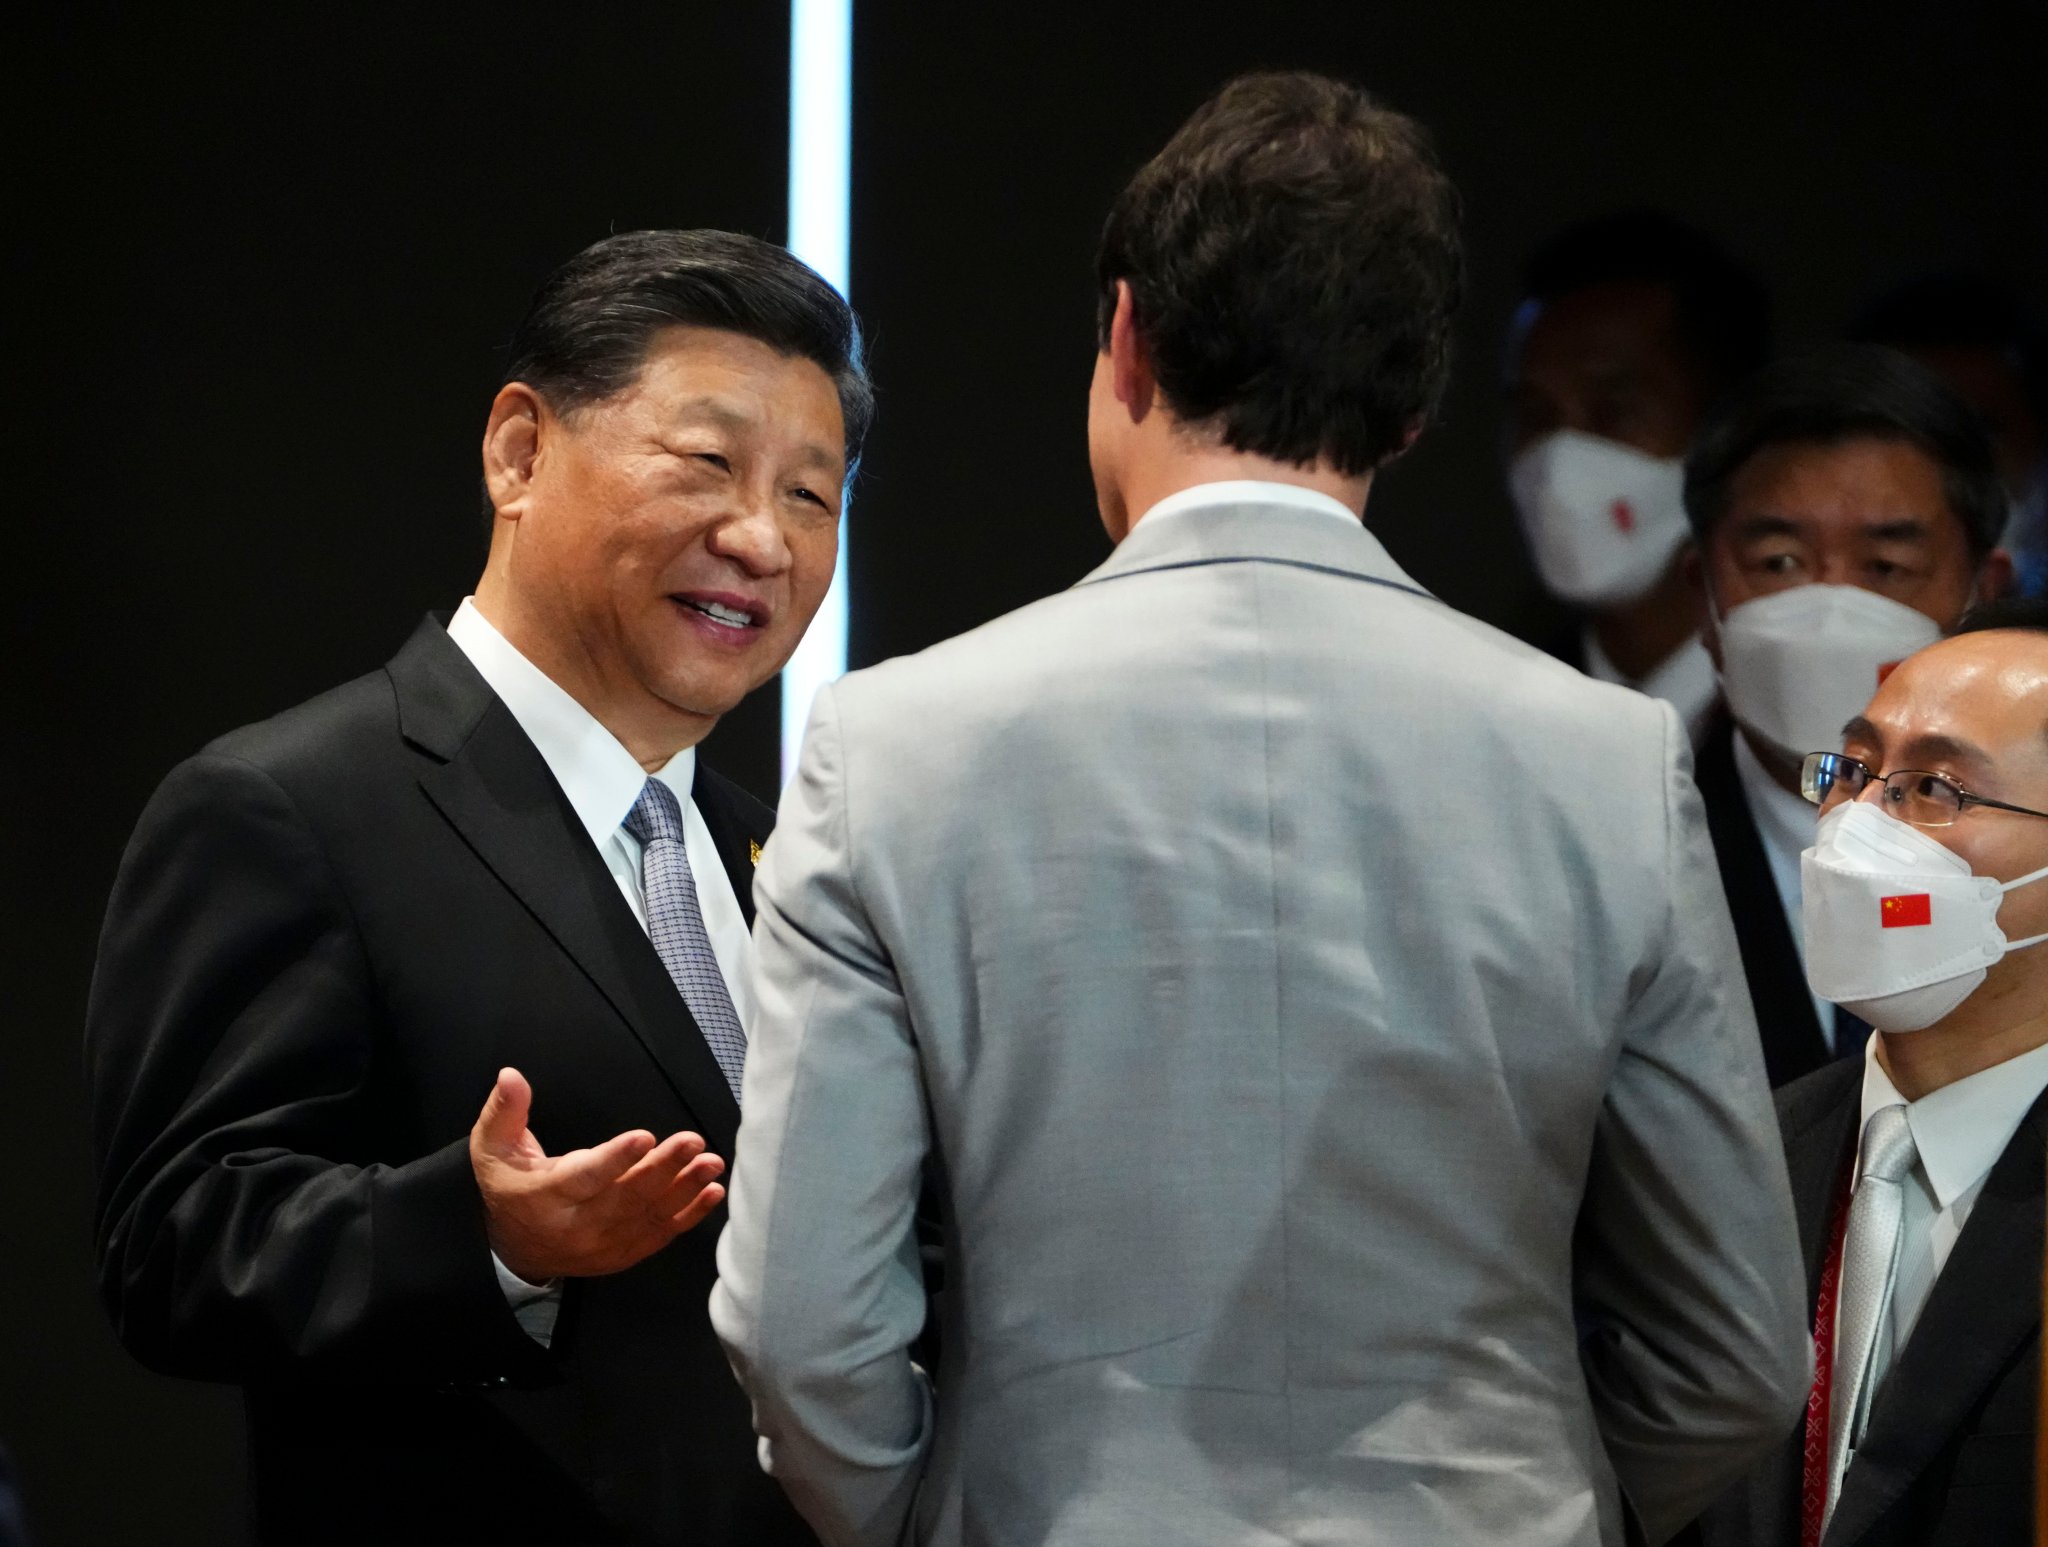 Prime Minister Justin Trudeau talks with Chinese President Xi Jinping after taking part in the closing session at the G20 Leaders Summit in Bali, Indonesia, Nov. 16, 2022. THE CANADIAN PRESS/Sean Kilpatrick